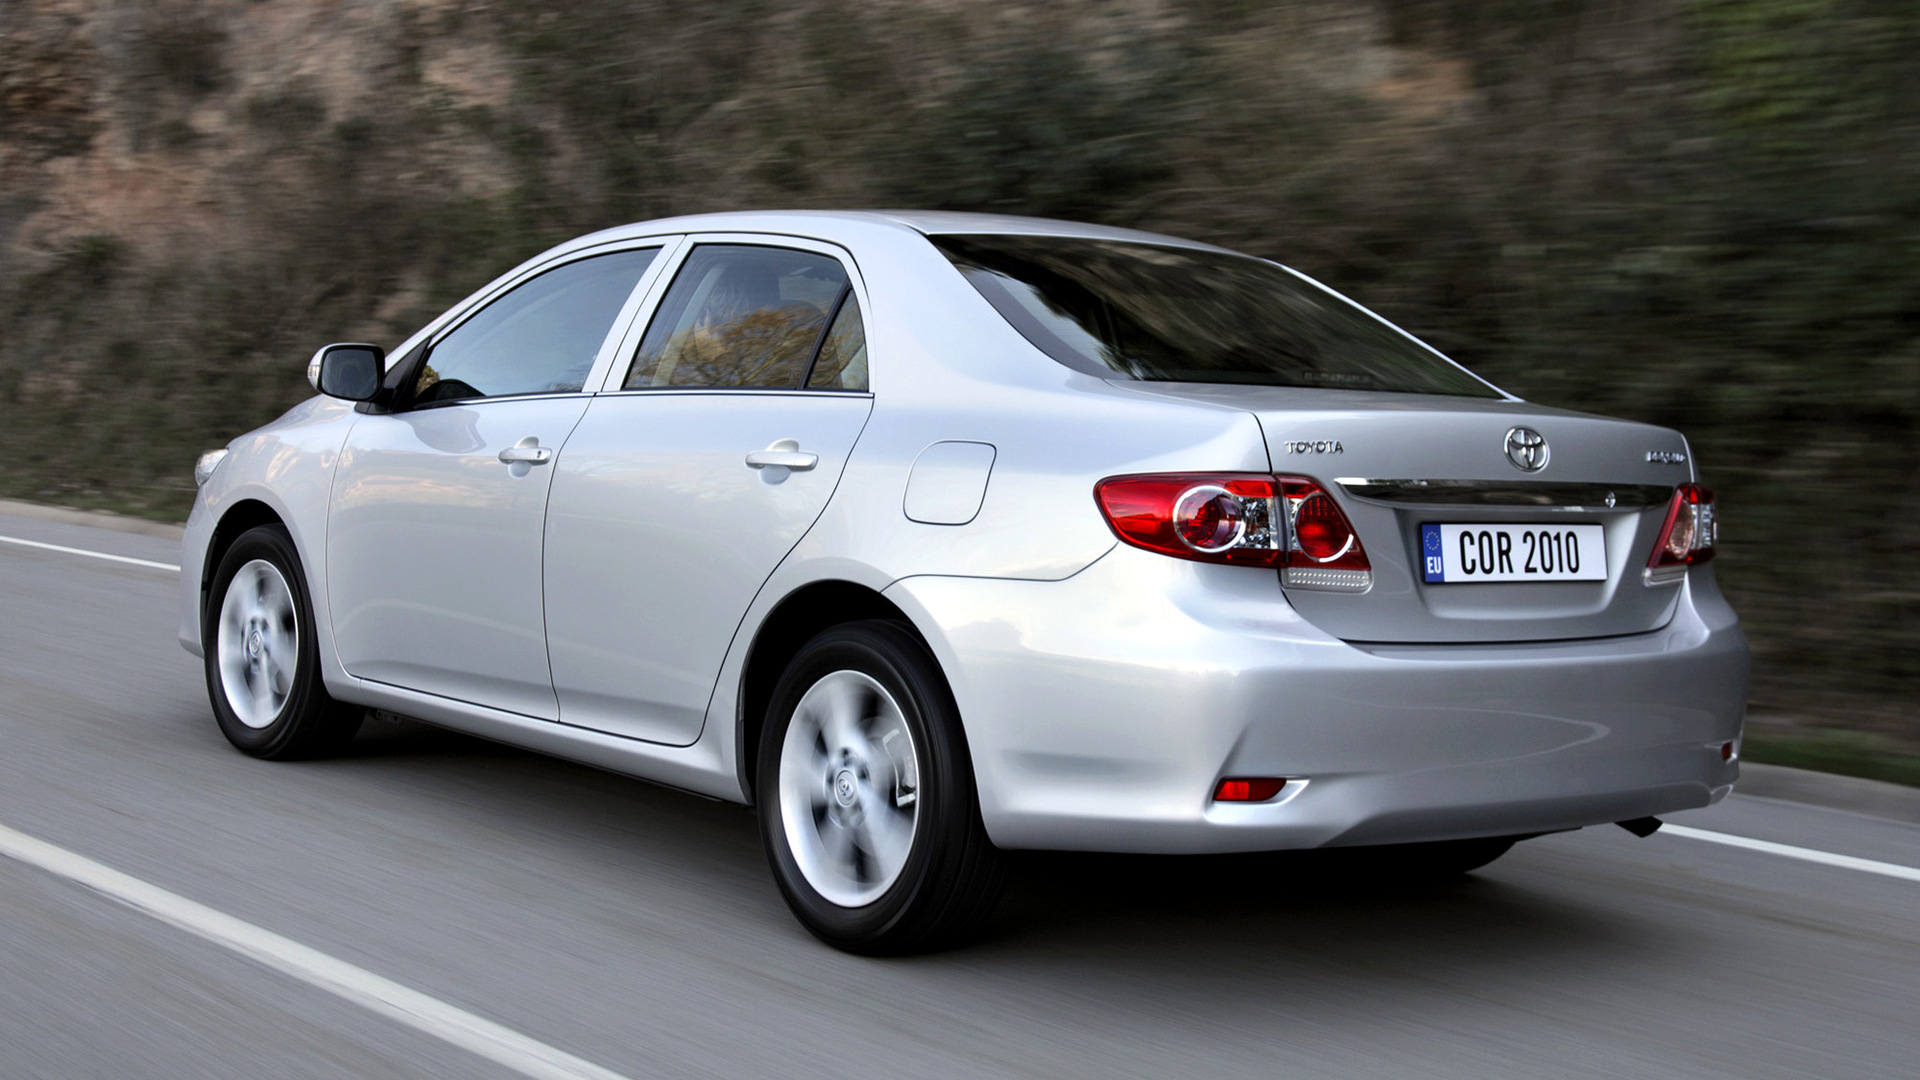 2010 Toyota Corolla (EU) - Wallpapers and HD Images | Car Pixel